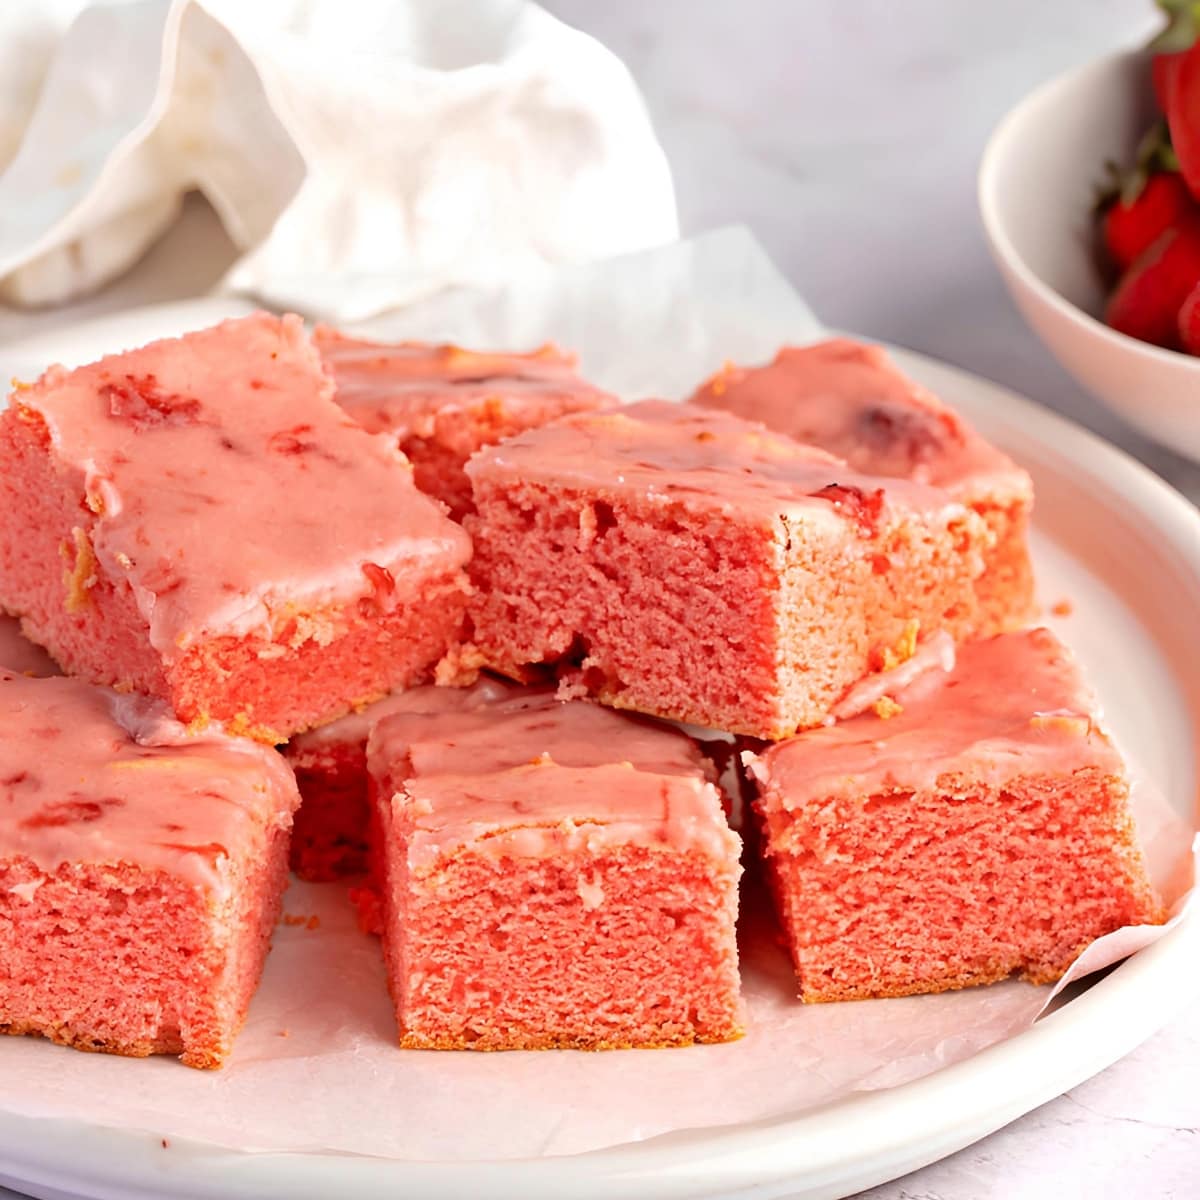 Slices of Strawberry Brownies on a Round Plate